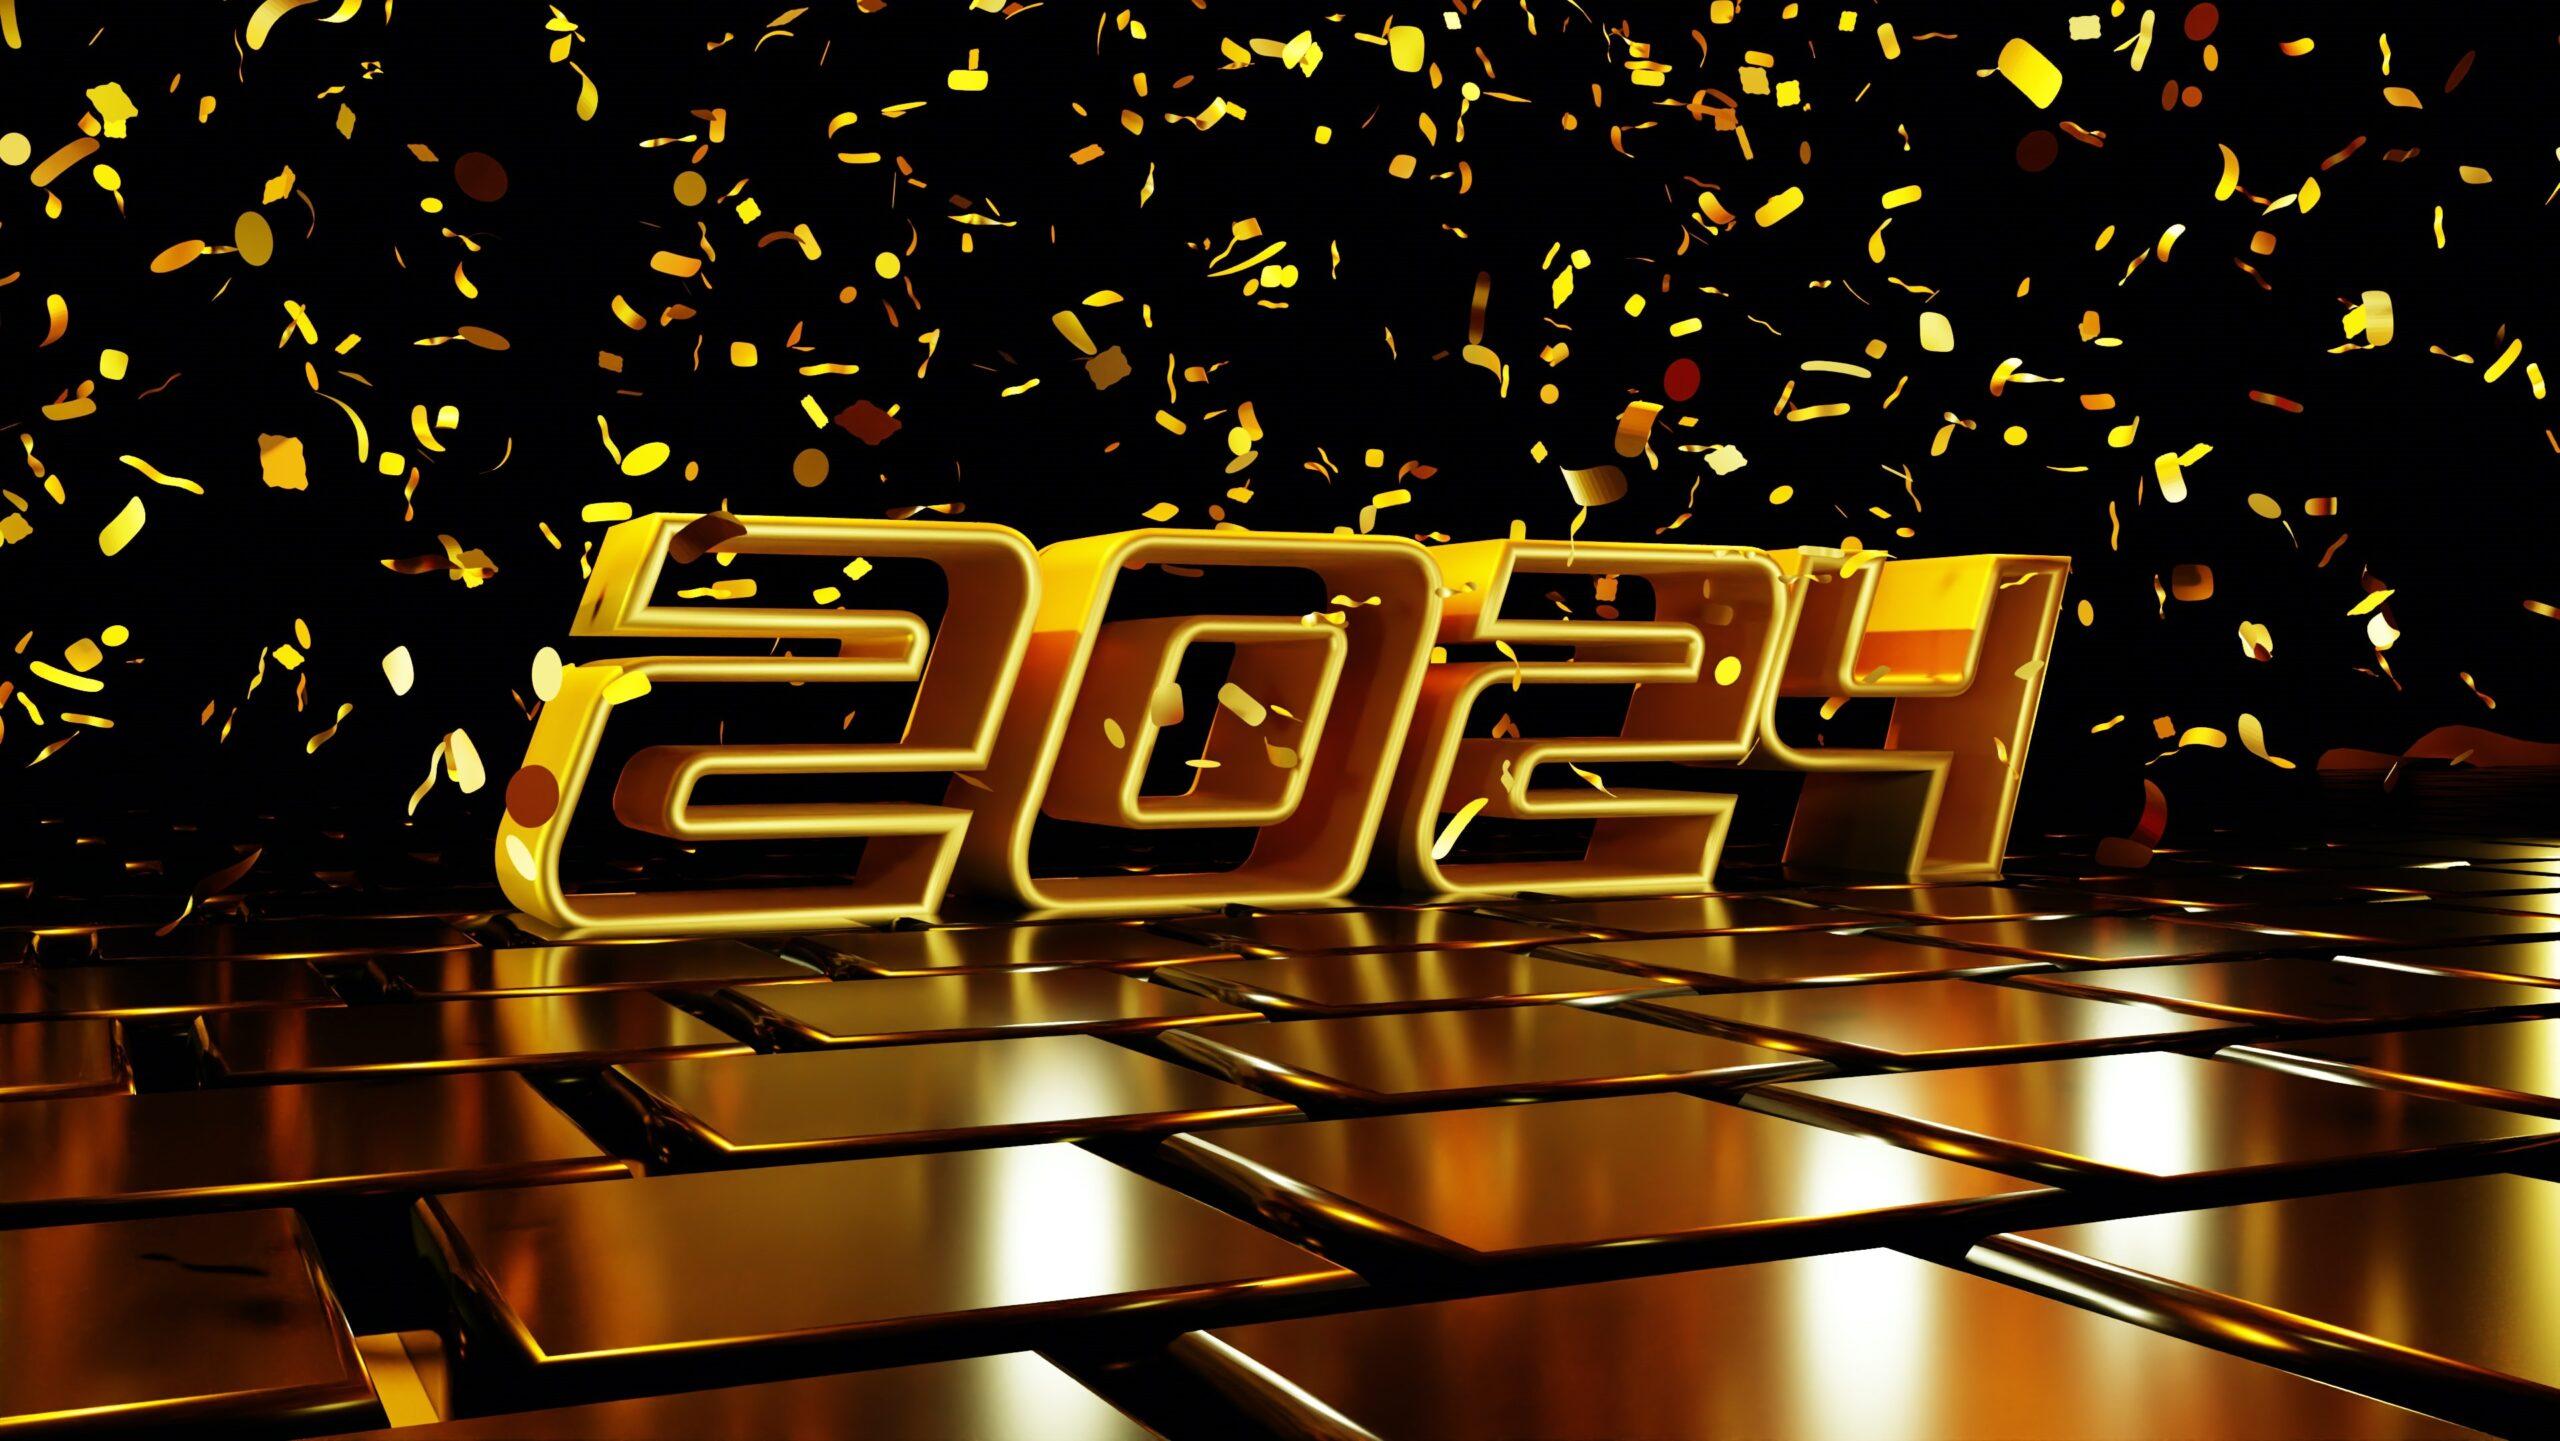 The number '2024' written in yellow against a confetti-like background.